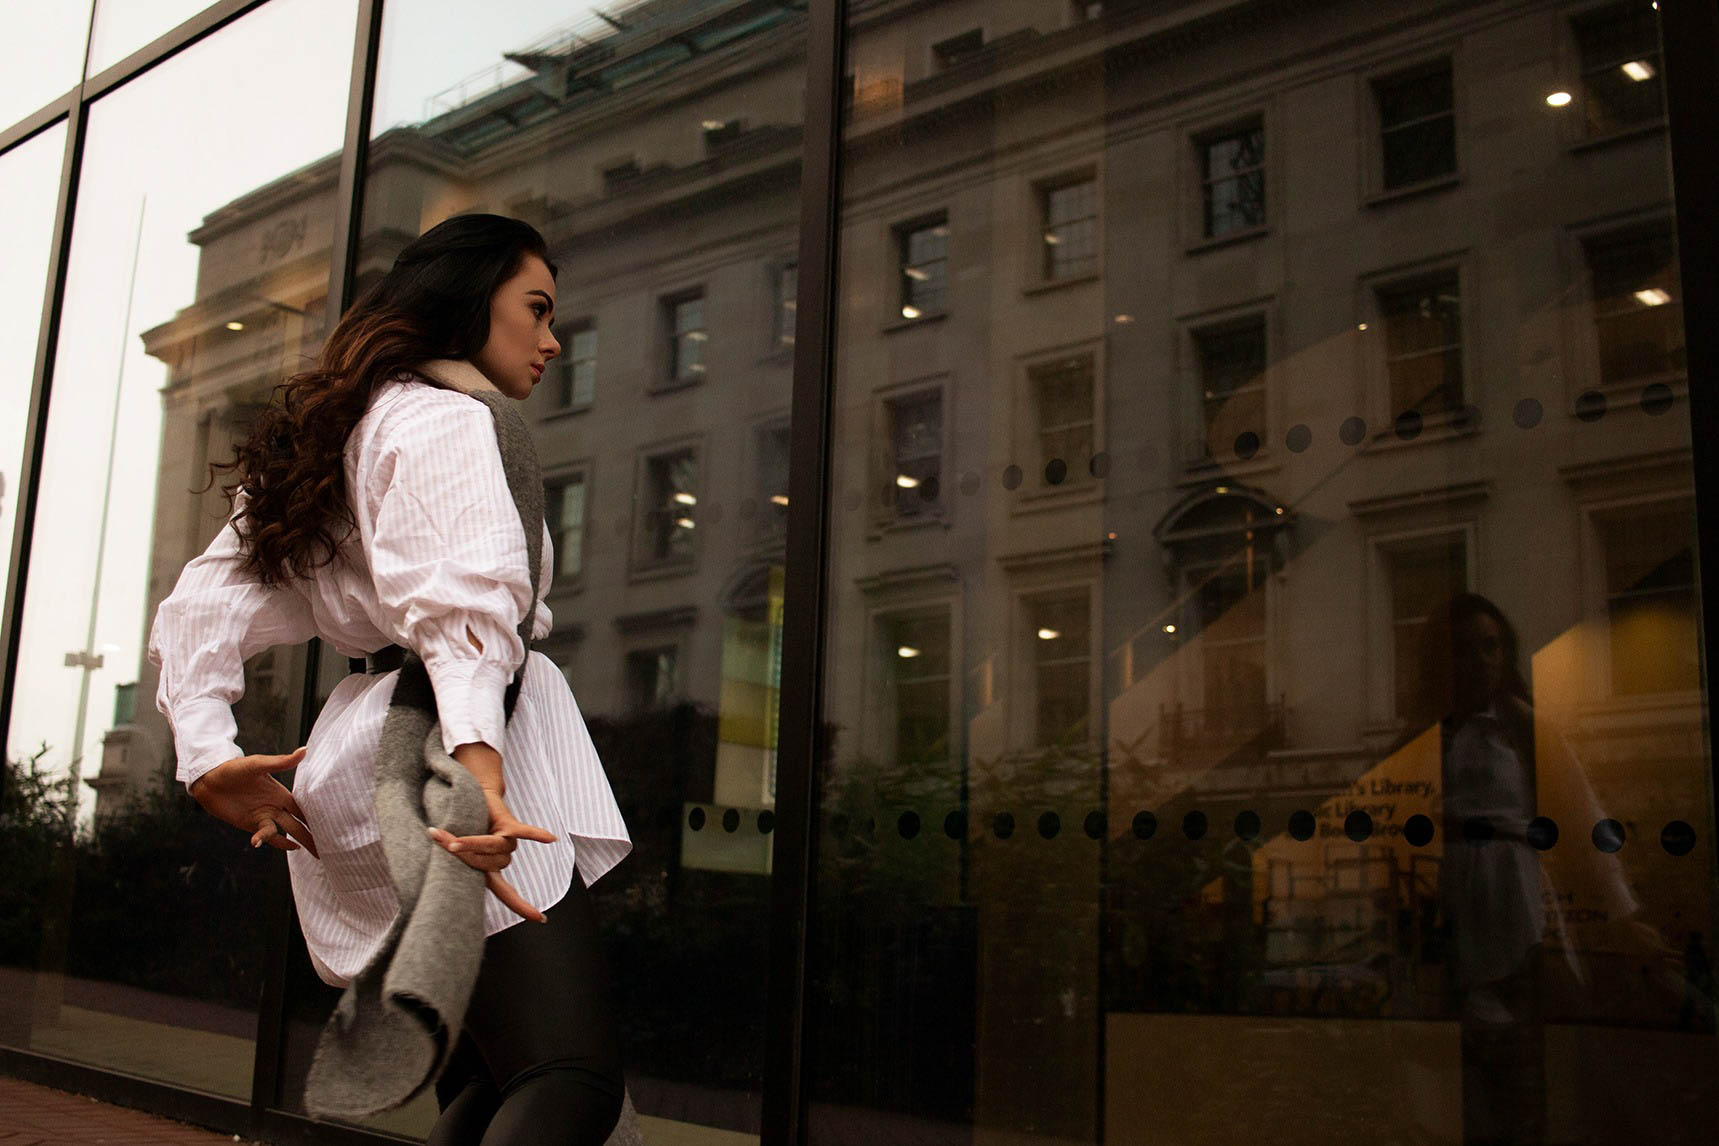 A dark haired dancer wearing white shirt and grey scarf is dancing with her reflection